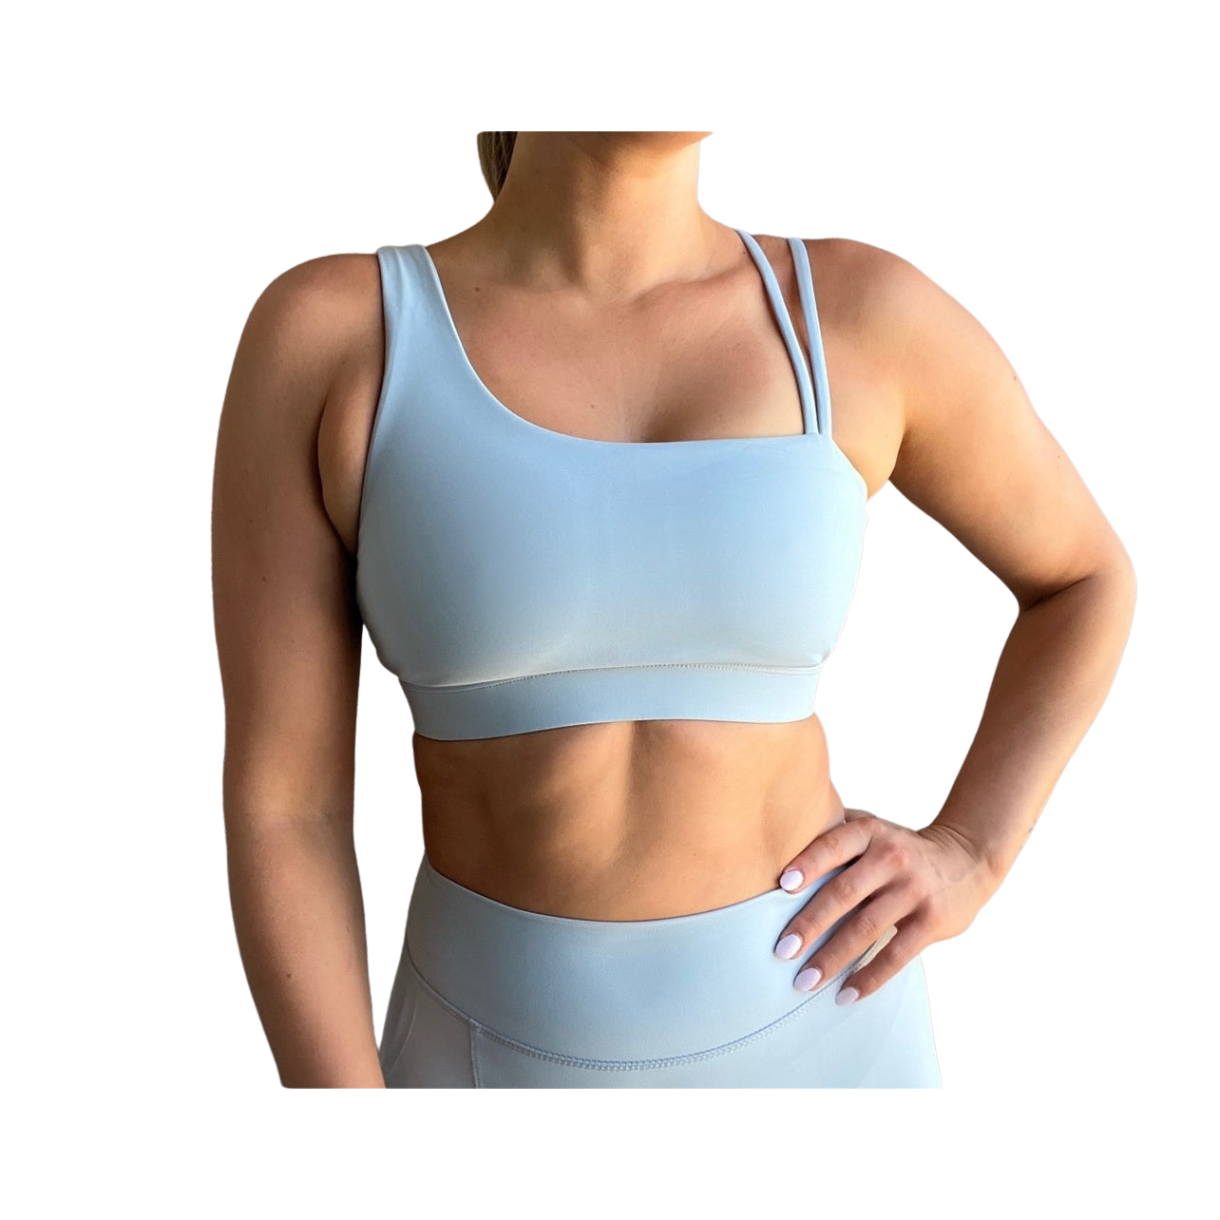 Dusty blue asymmetrical sports bra with one thick strap and two thinner straps